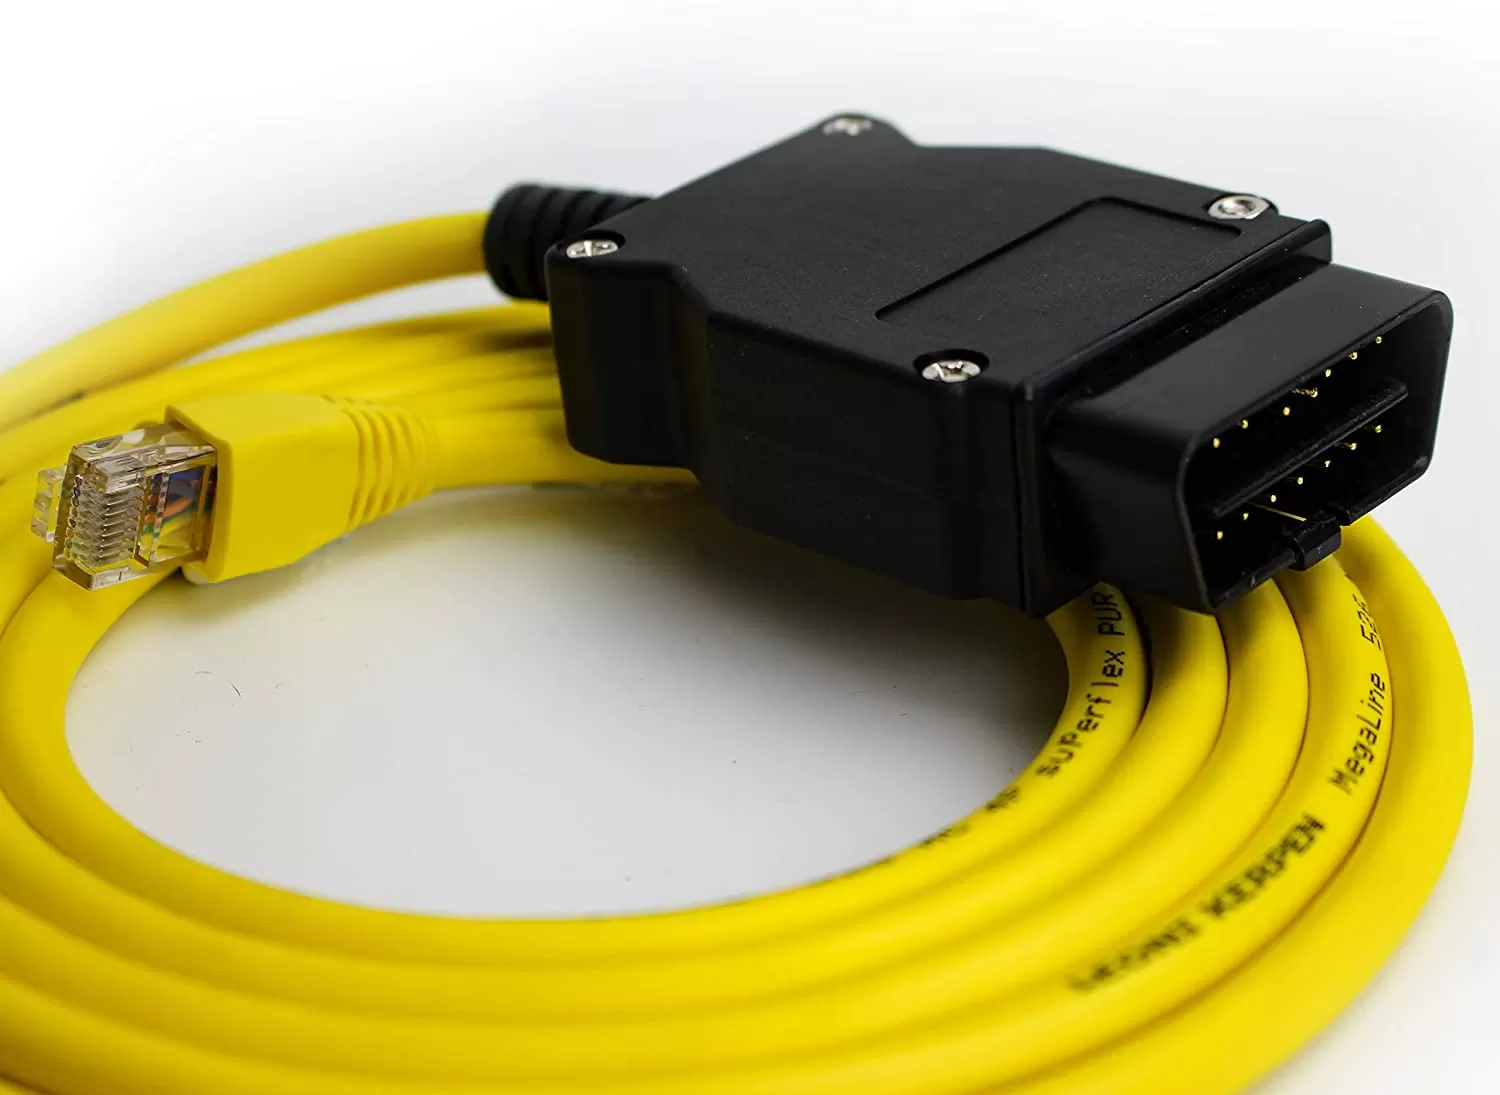 VR Tuned E-Net OBD2 Cable for Tuning or Coding